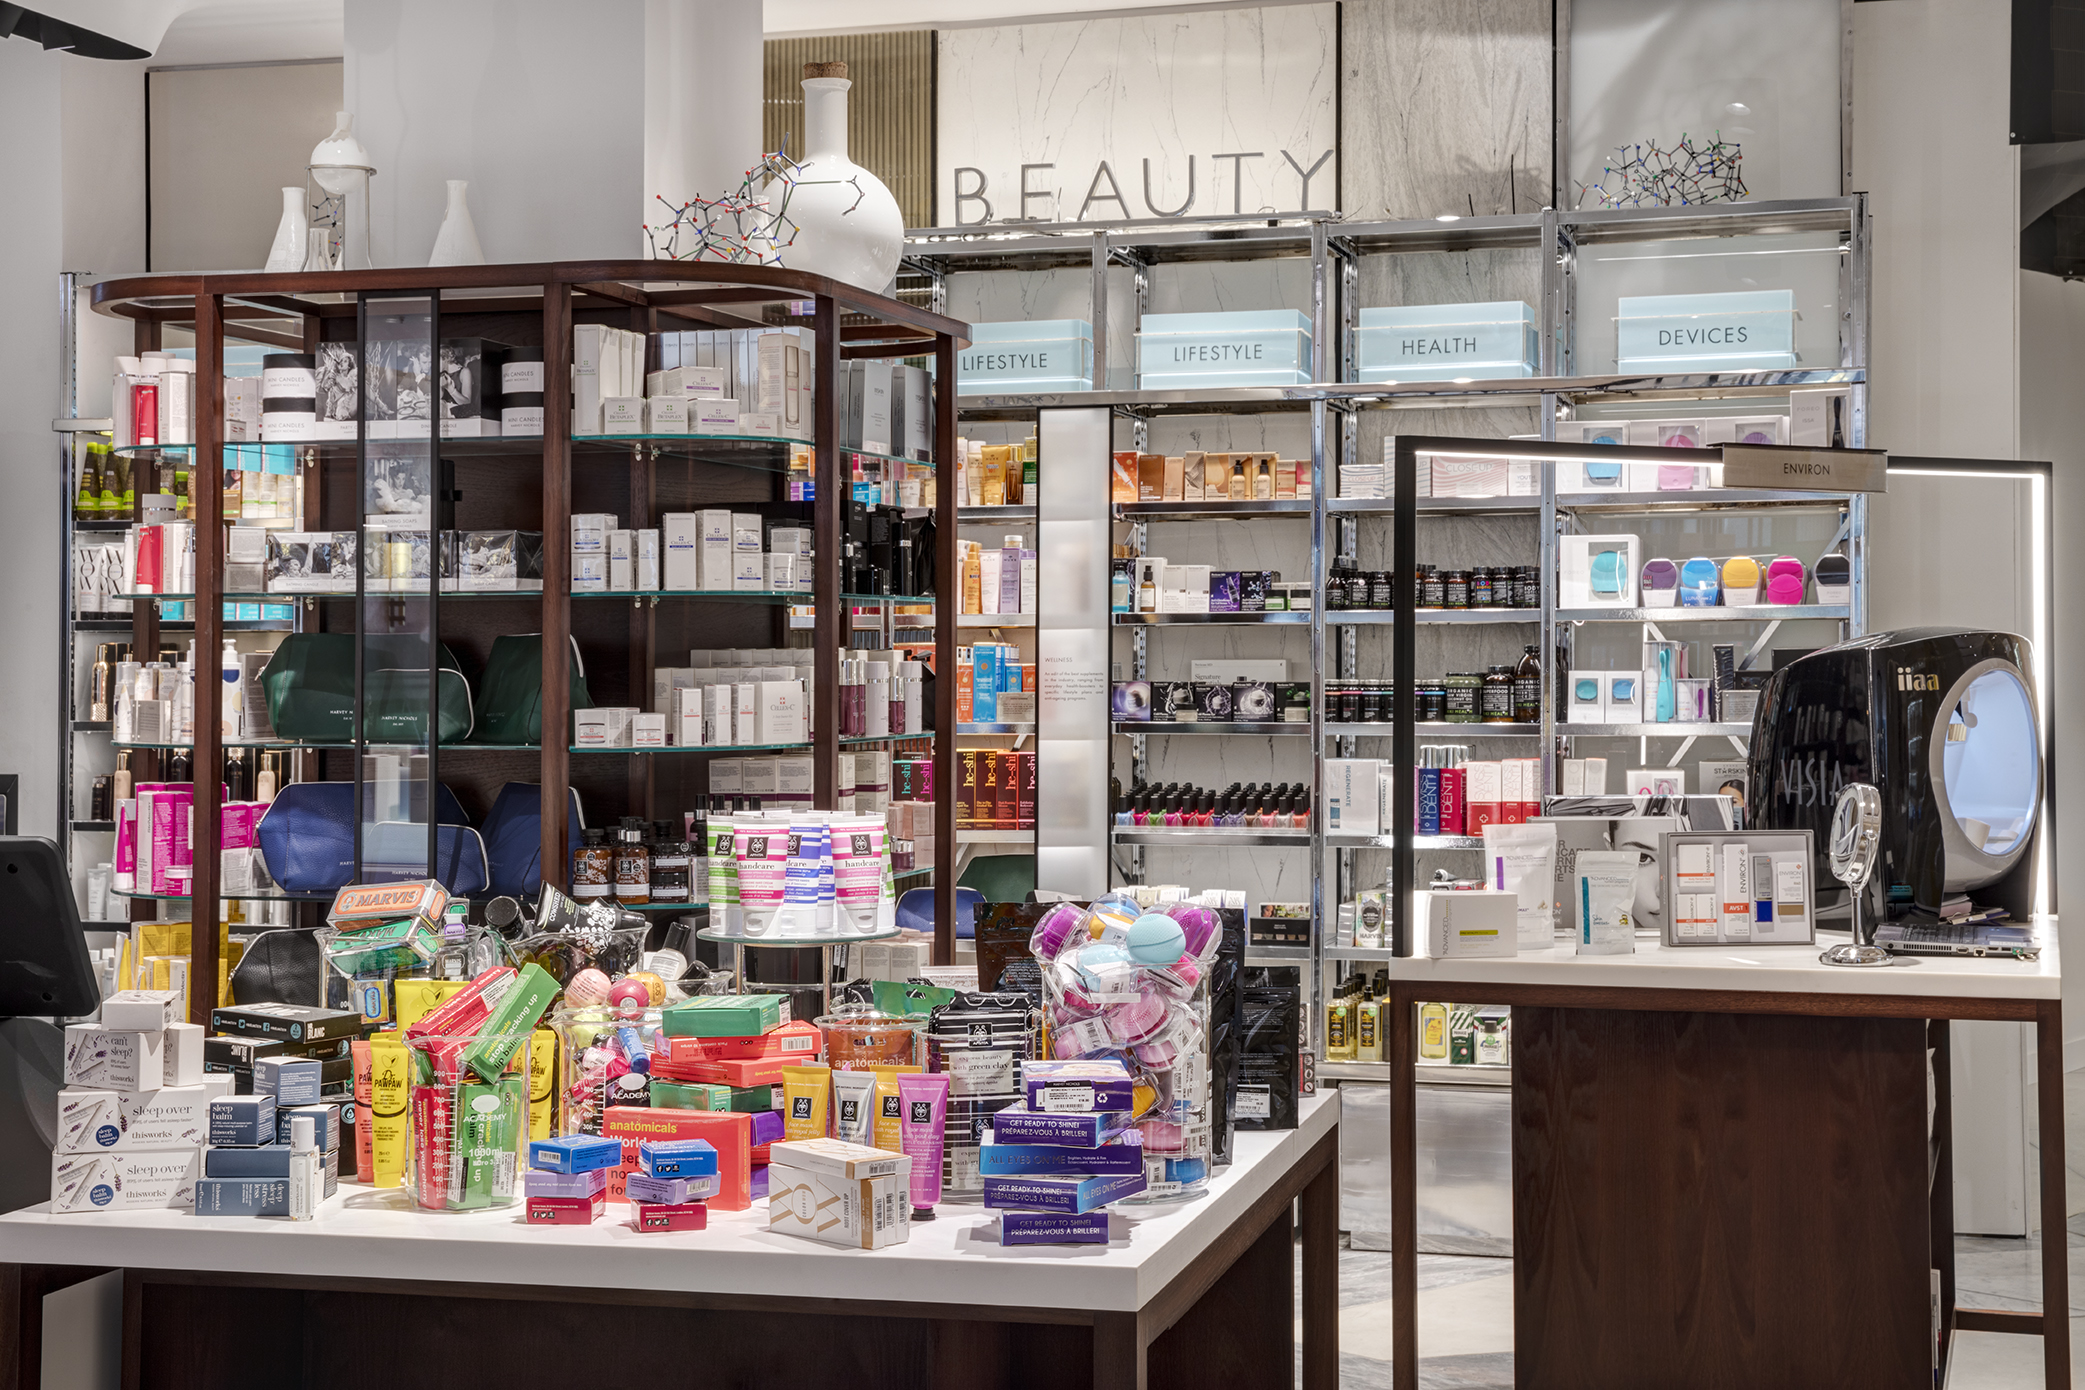 The Beyond Beauty section will showcase iconic brands from the last decade